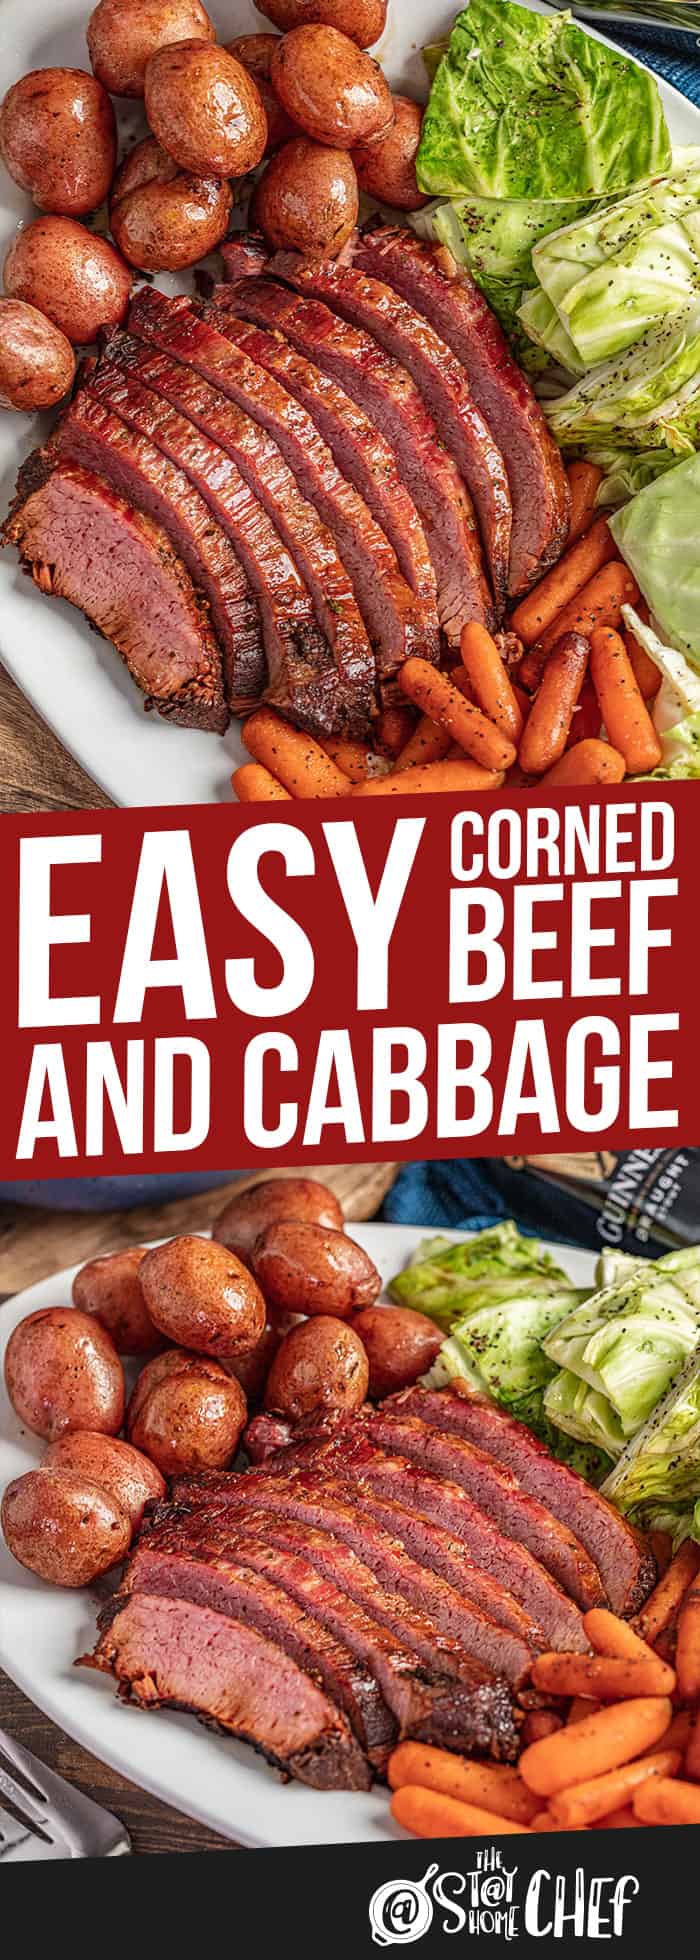 Easy Corned Beef and Cabbage (Stovetop or Slow Cooker)